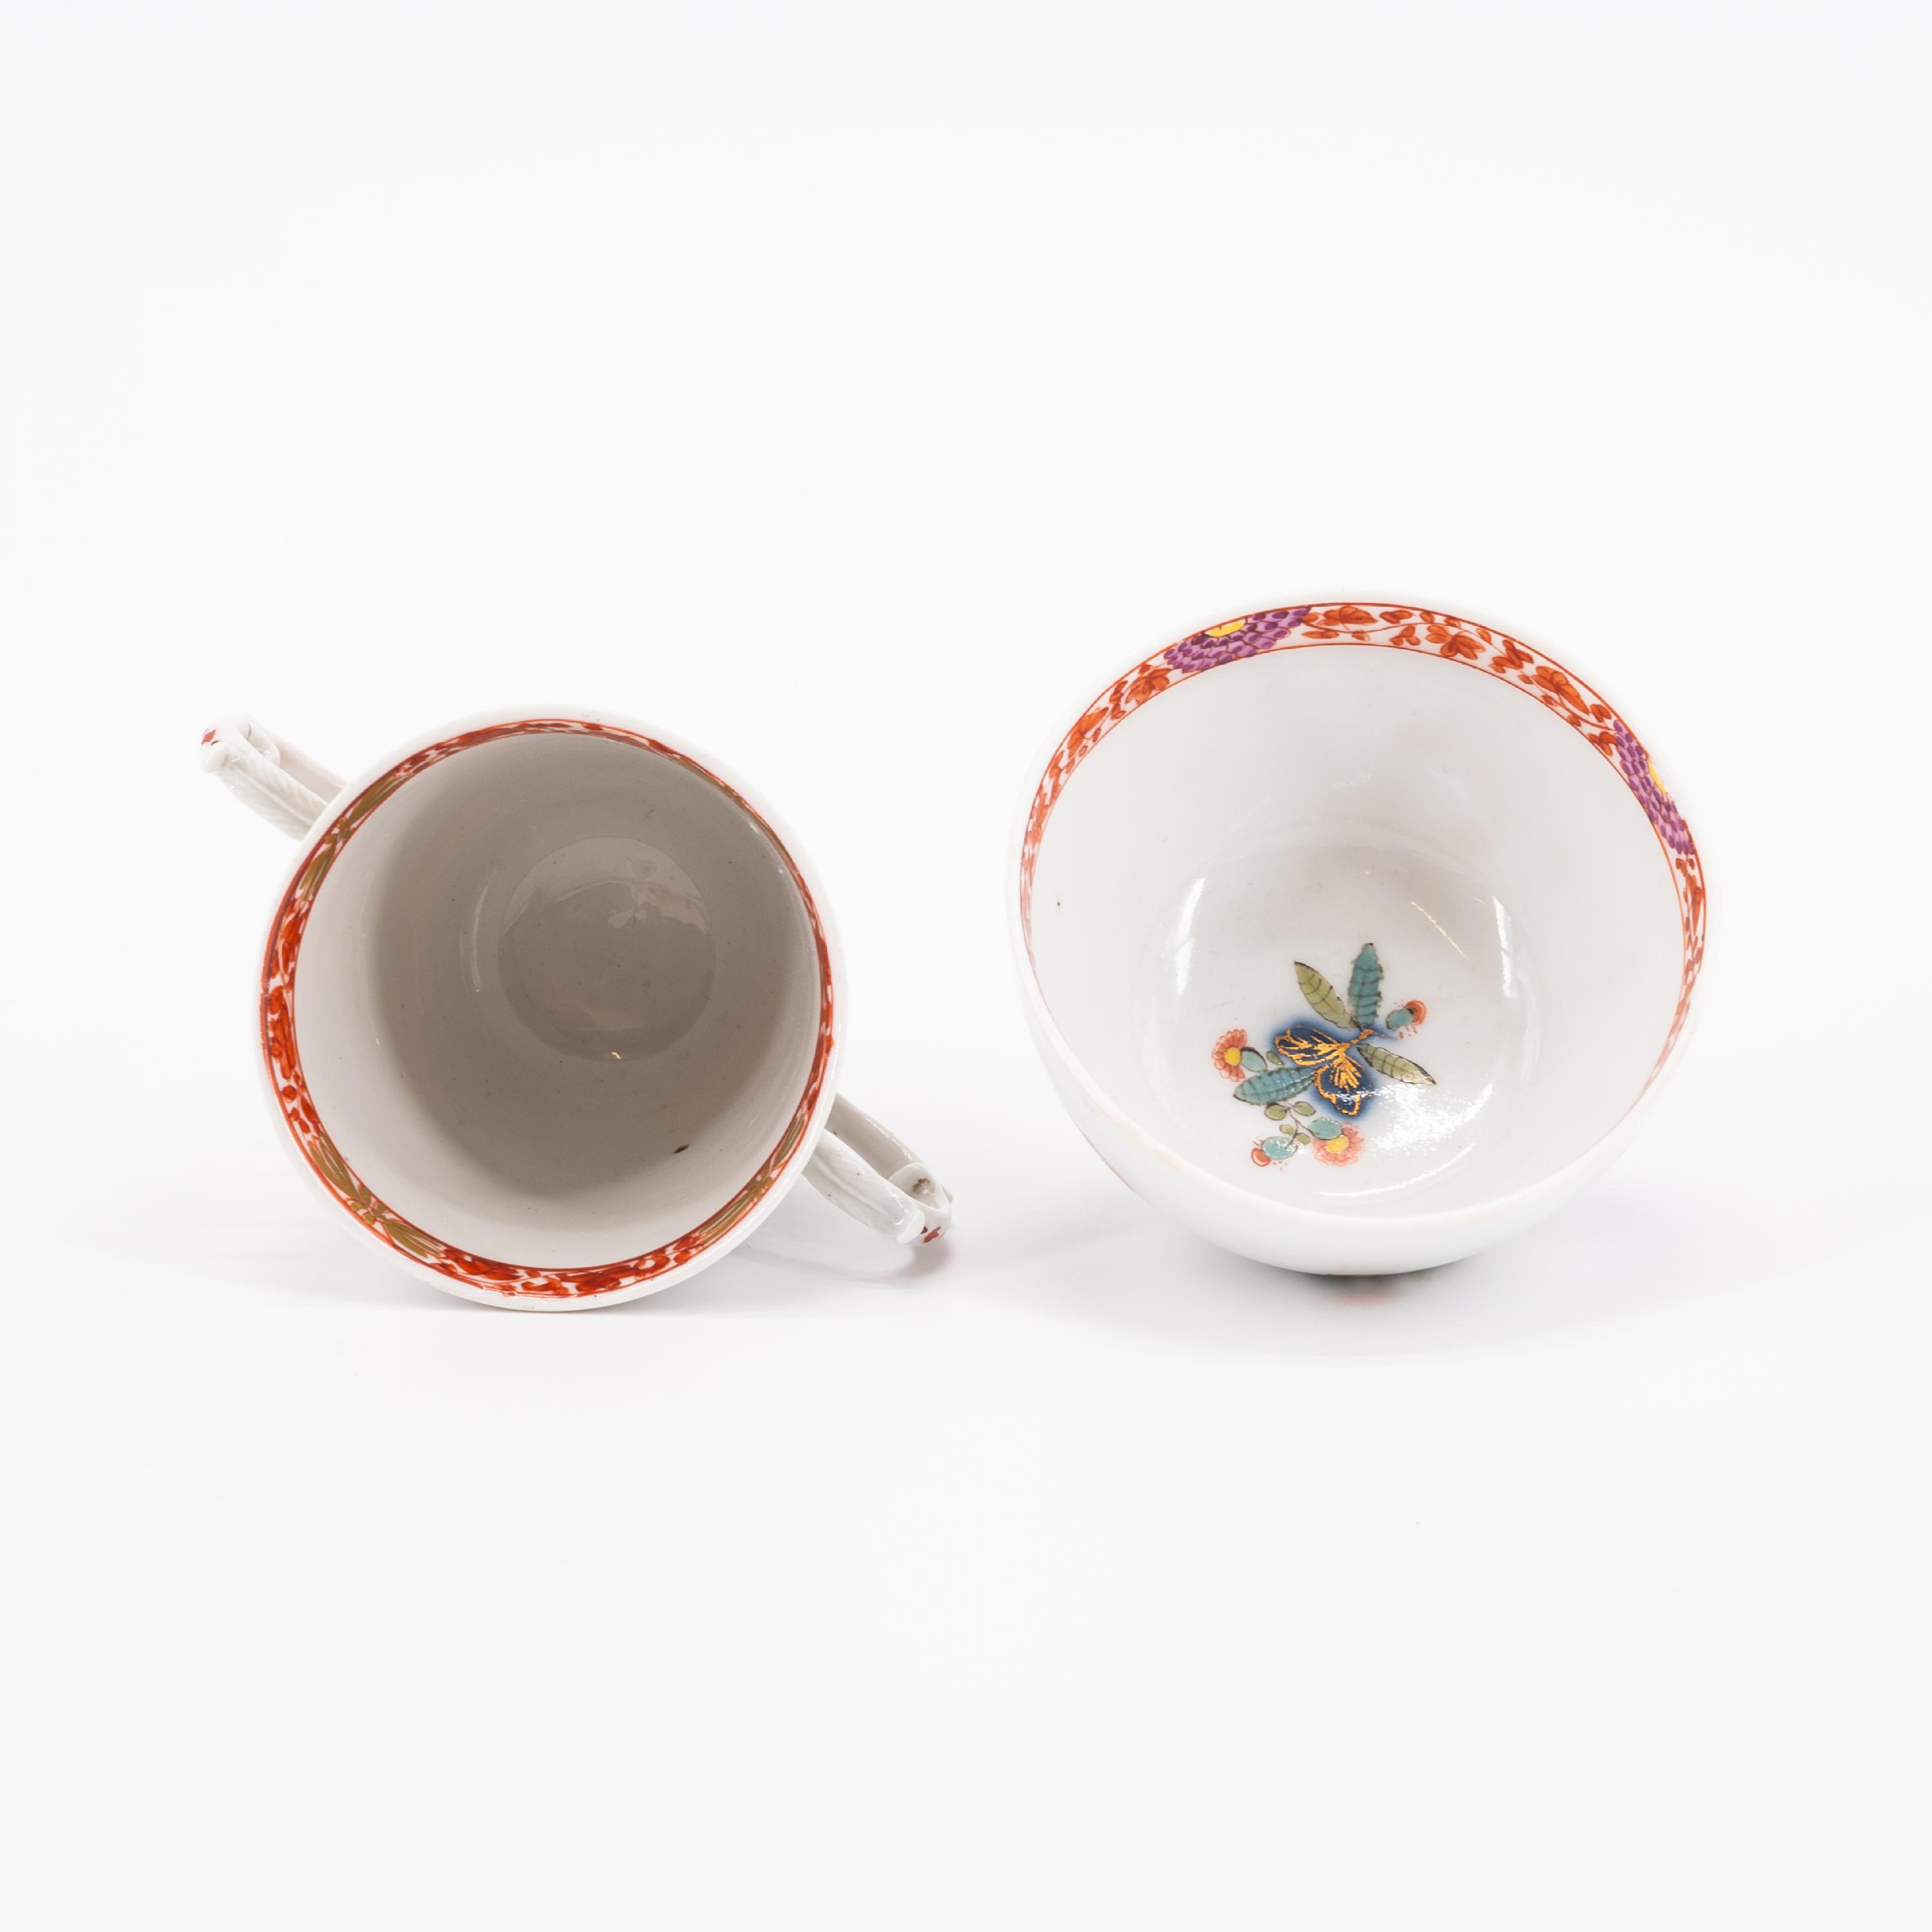 PORCELAIN TREMBLEUSE, TEA BOWL AND SAUCER WITH TABLE PATTERN AND KAKIEMON DECOR - Image 5 of 8